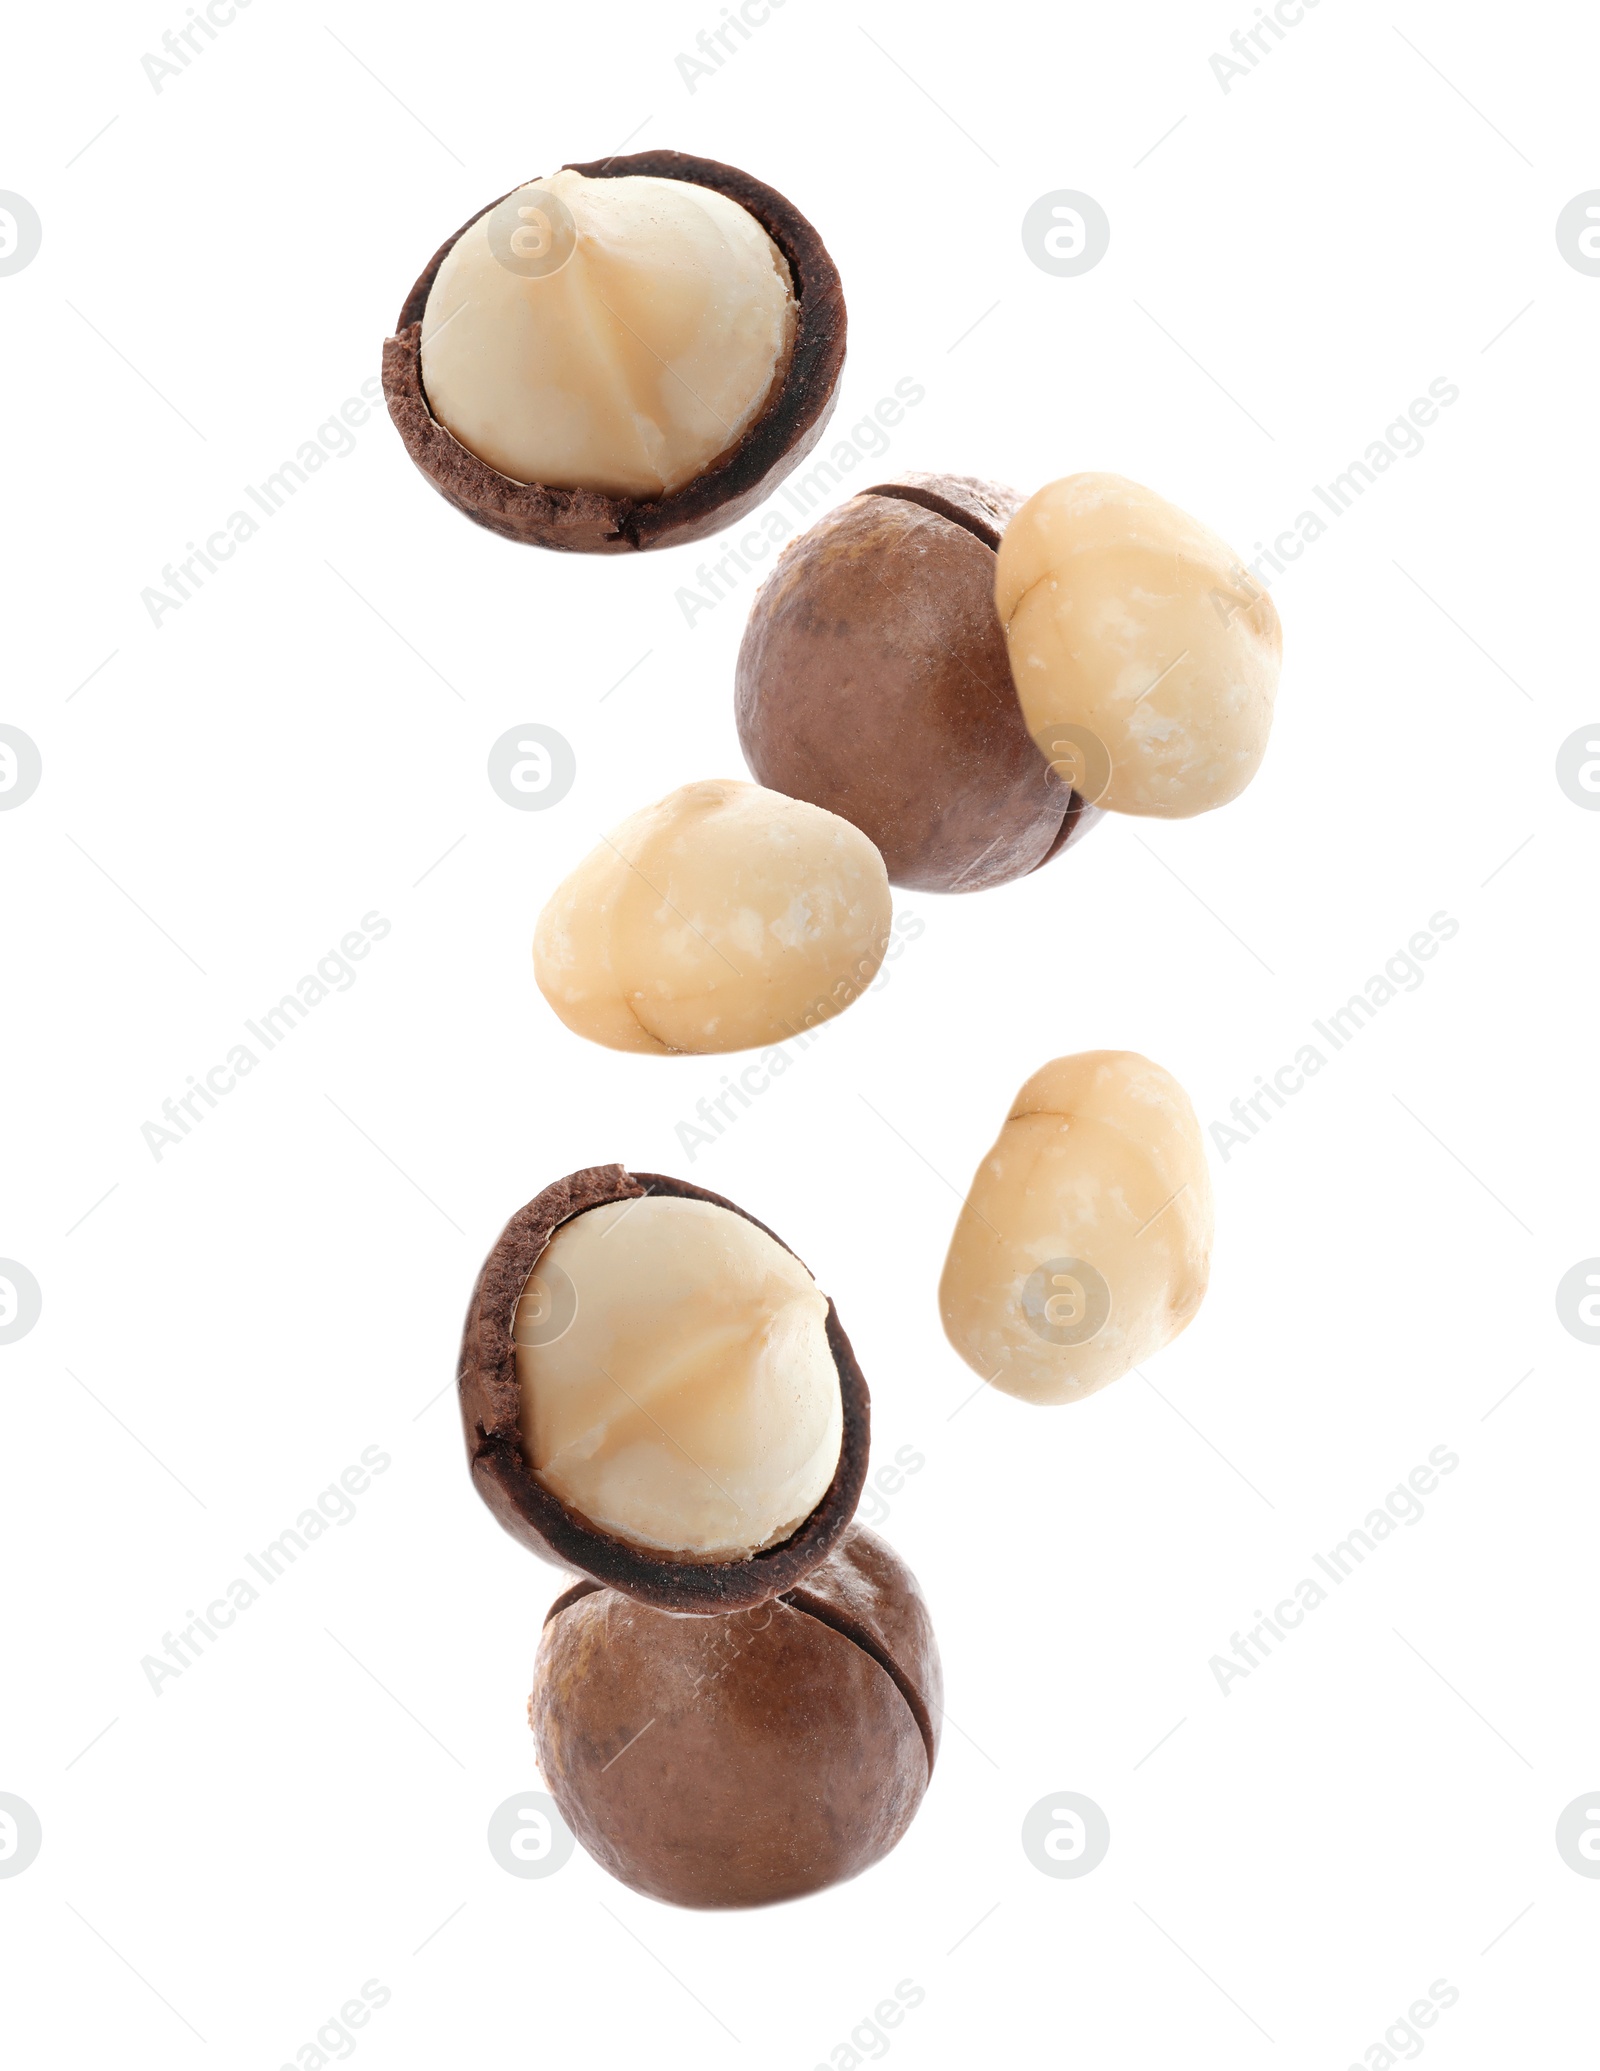 Image of Delicious Macadamia nuts falling on white background 